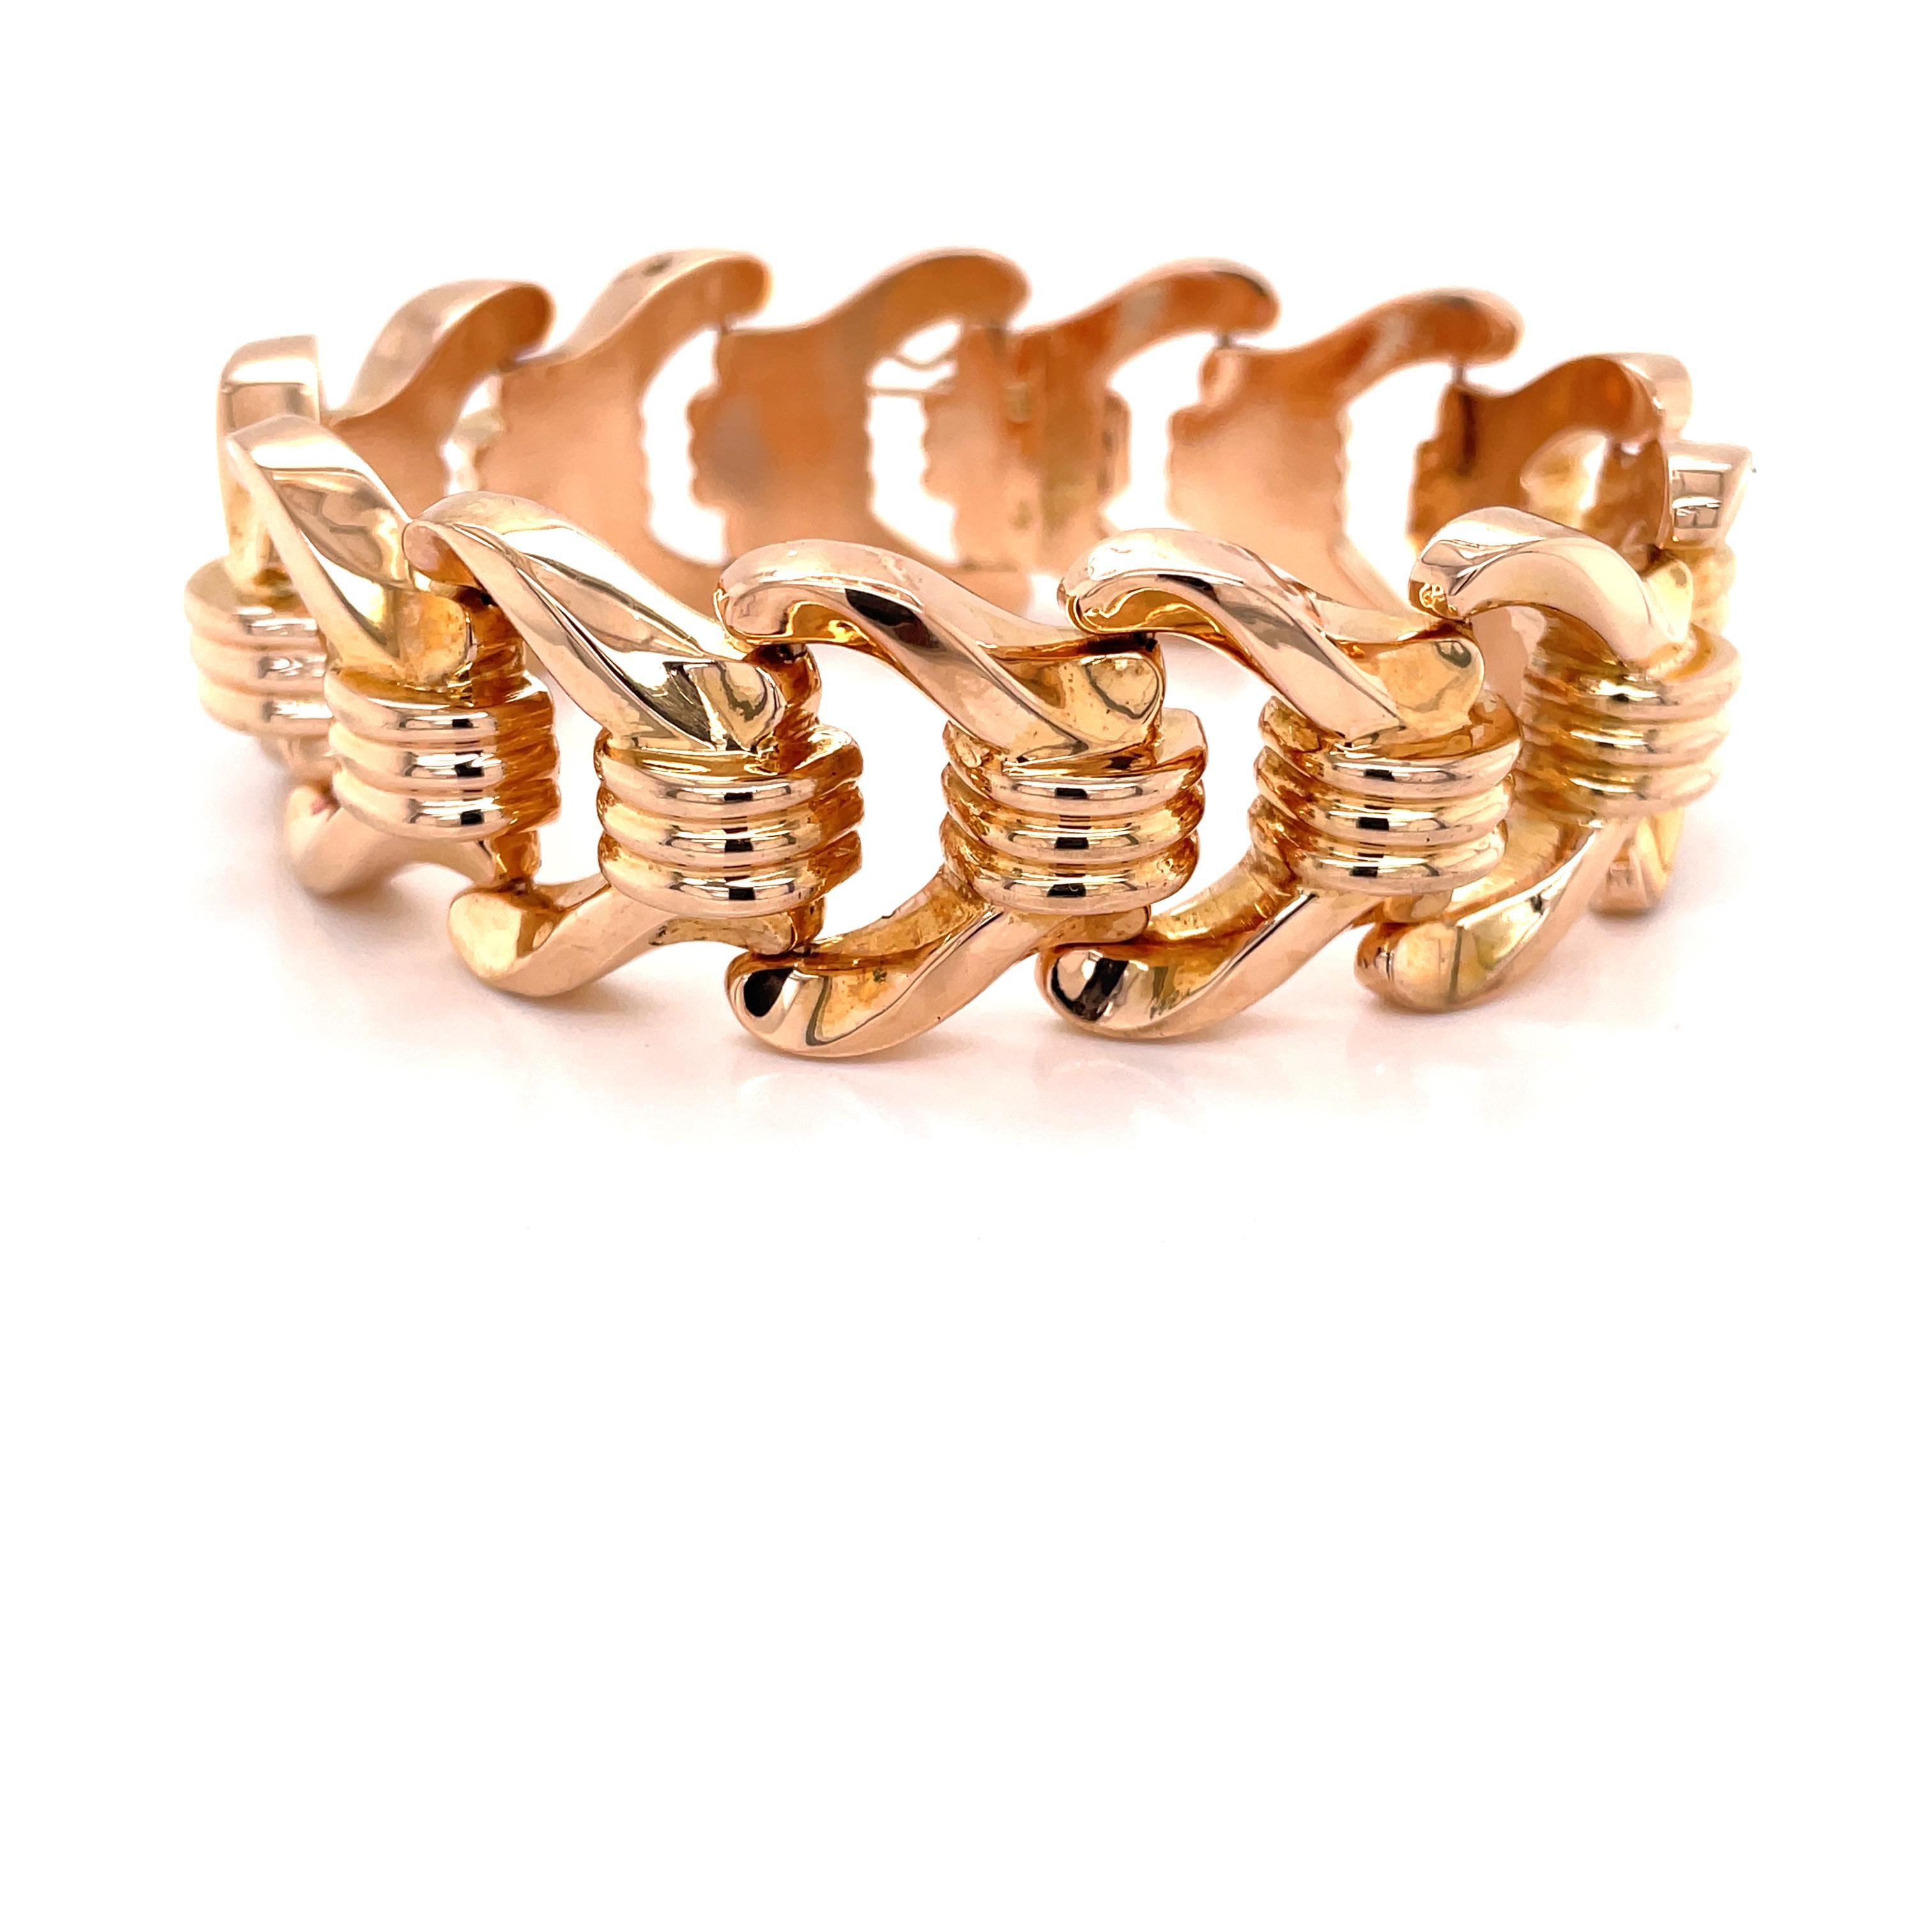 Brightly polished stylish links of eighteen karat 18K rose gold create this spectacular retro bracelet. Quality Italian made, thirteen blush color 18K gold hollow links, each measuring approximately 7/8 inch wide, keep this bold statement piece